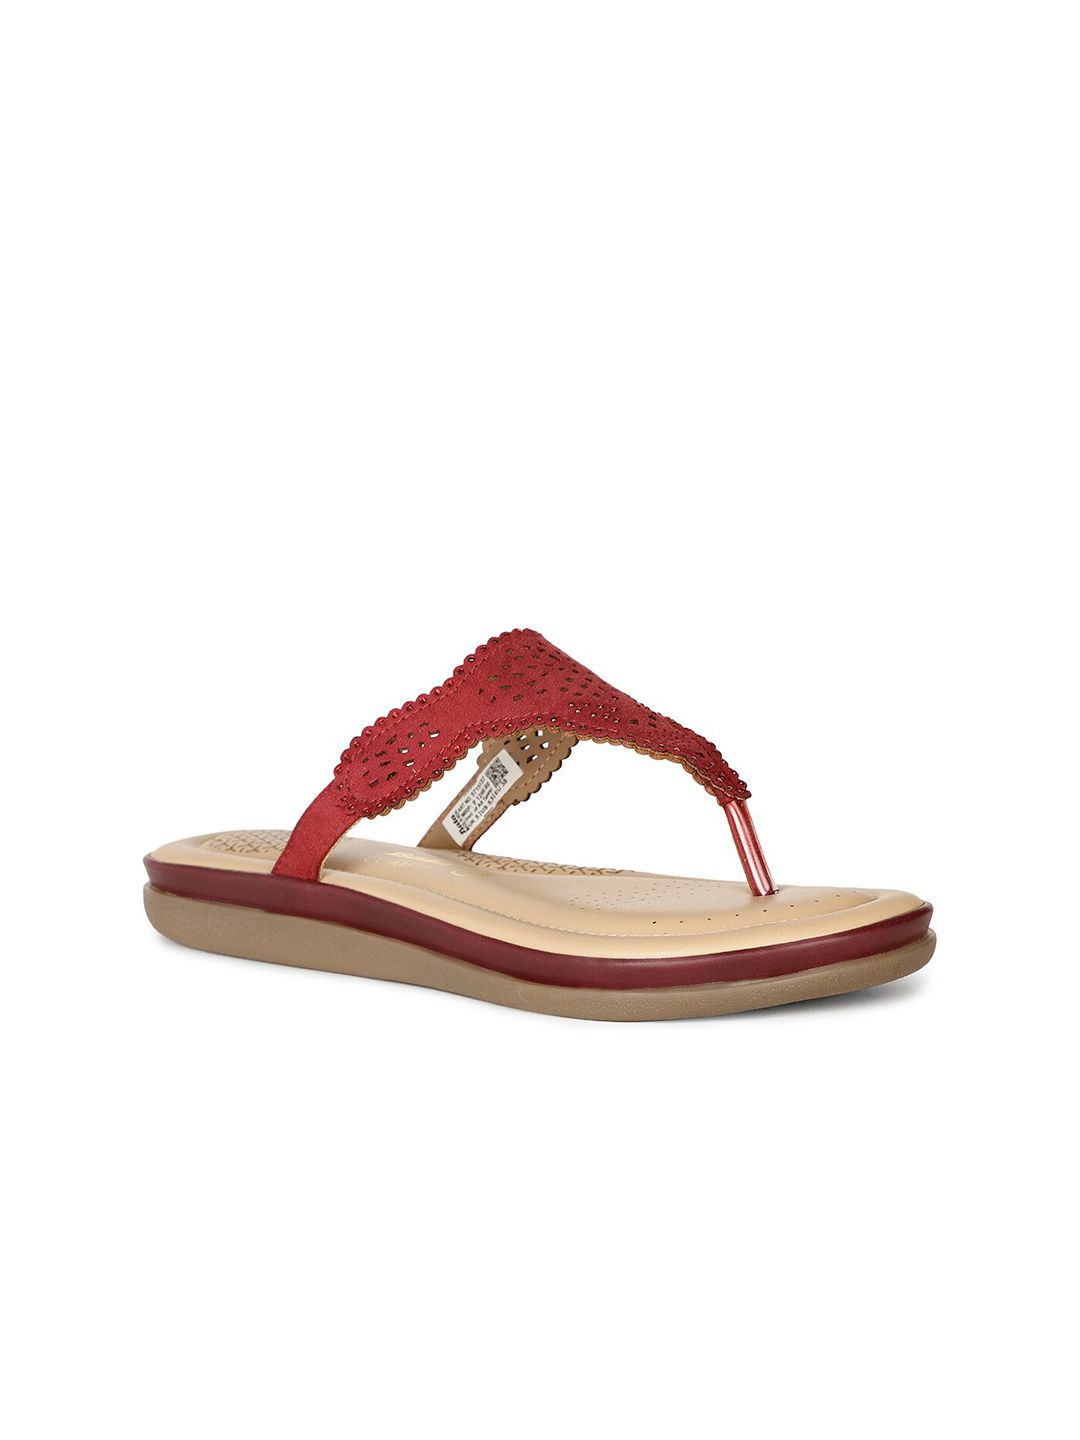 Bata Textured Laser Cuts T-Strap Flats Price in India